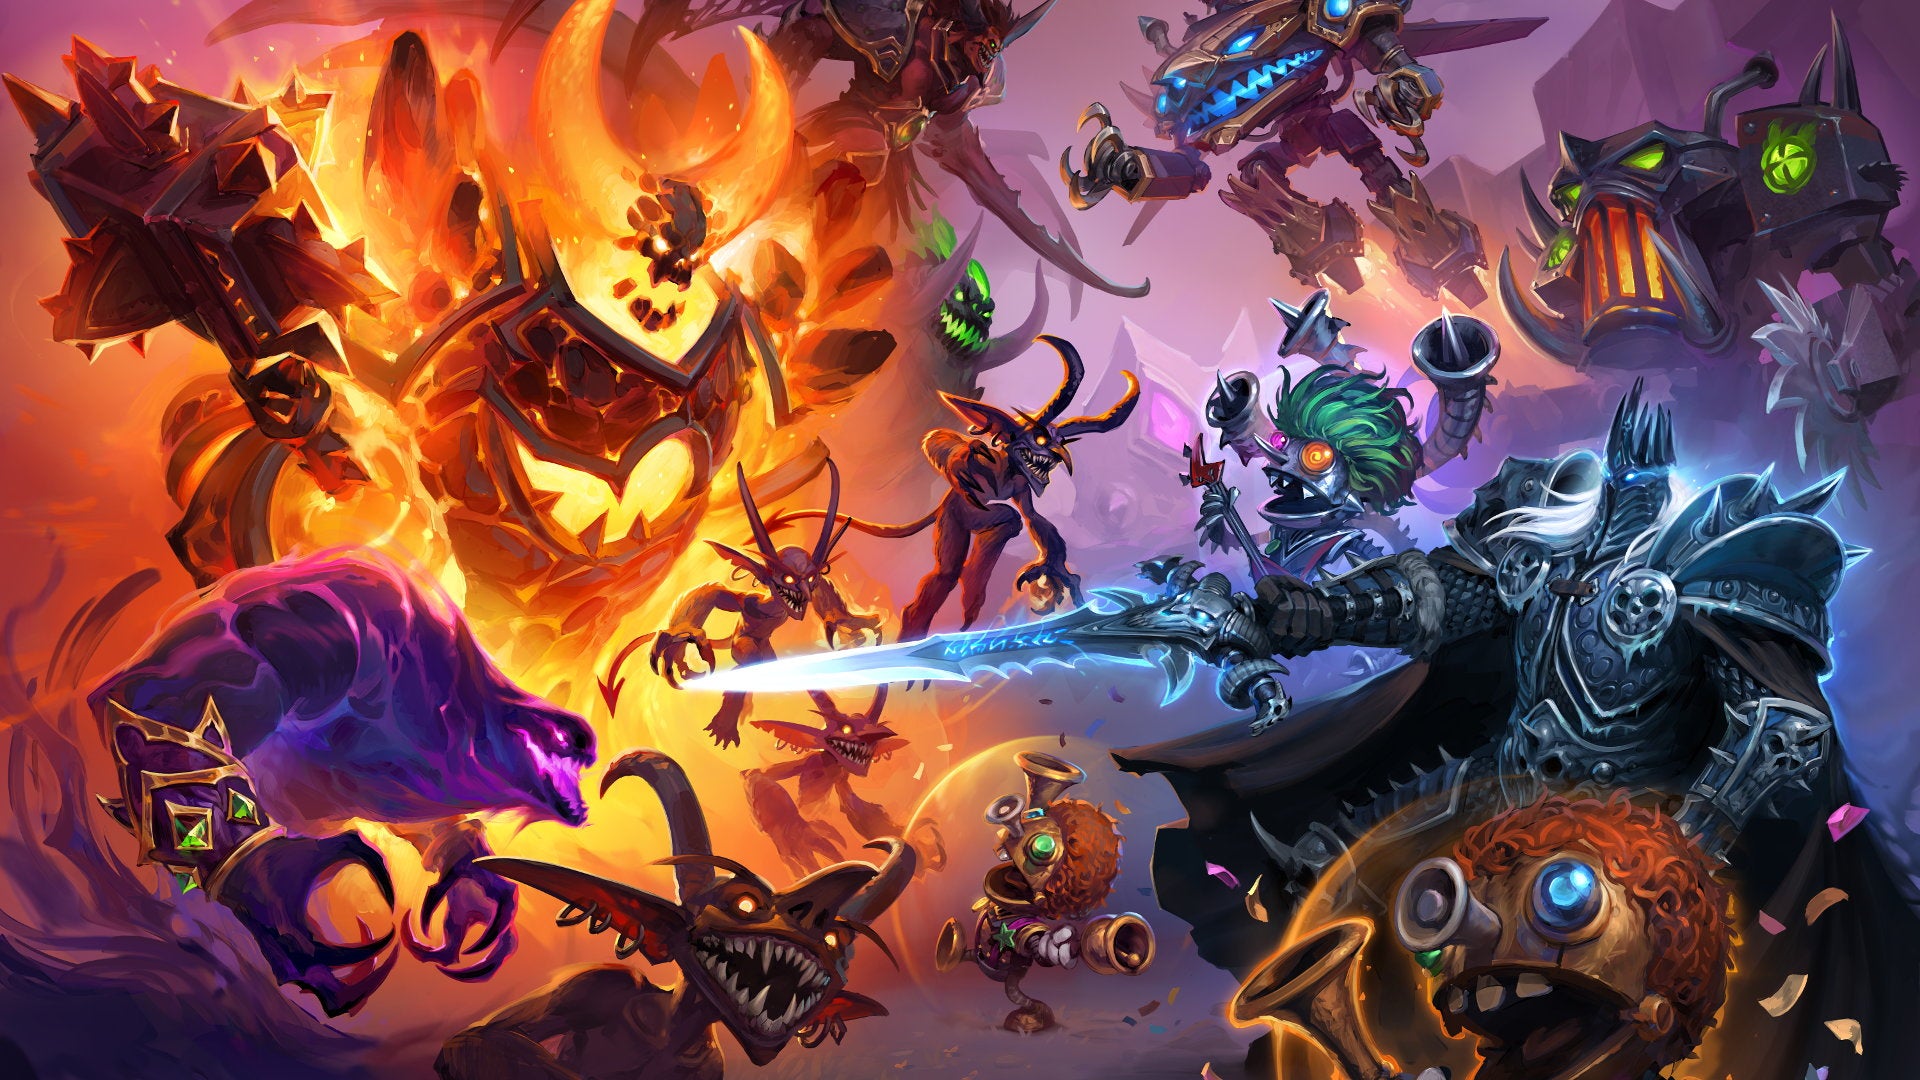 Image for Hearthstone adding Battlegrounds, an Auto Chess-ish mode